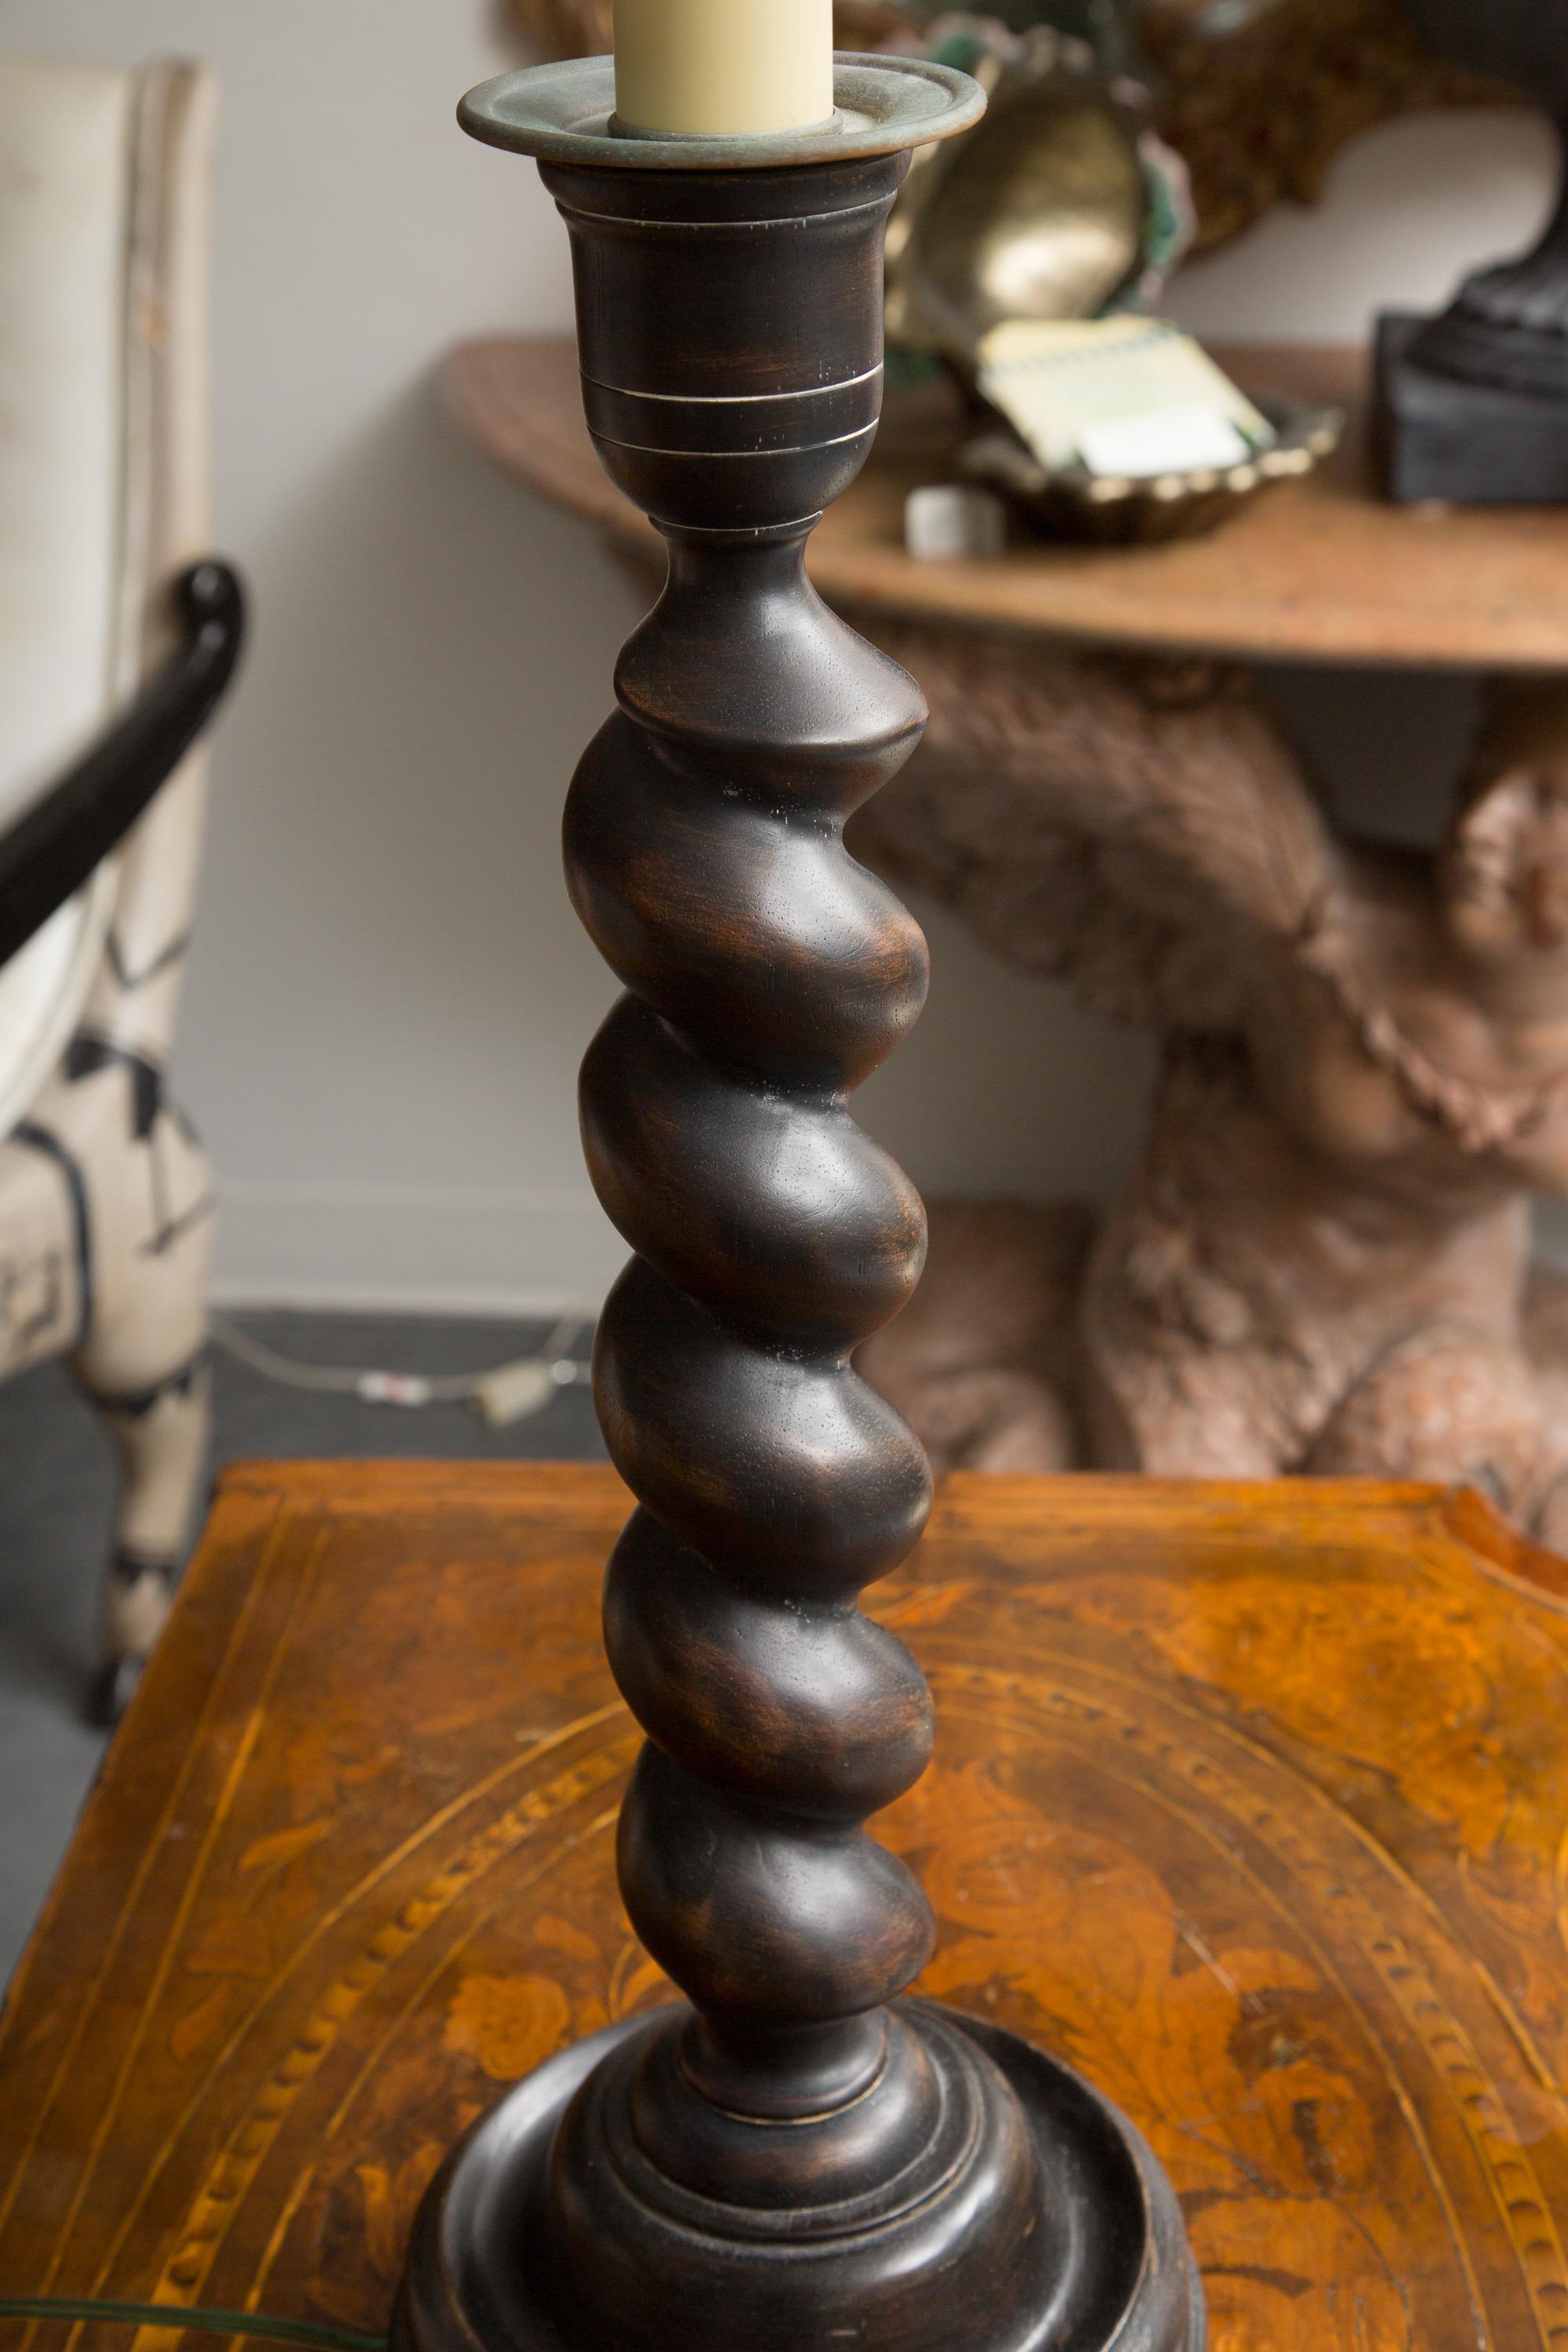 These are a classic pair of 'old world' barley twist tall candlesticks made as table lamps. The wooded twisted candle sticks with a metal bobeche are mounted on a metal square base patinated to match the candle stick. They are electrified with a